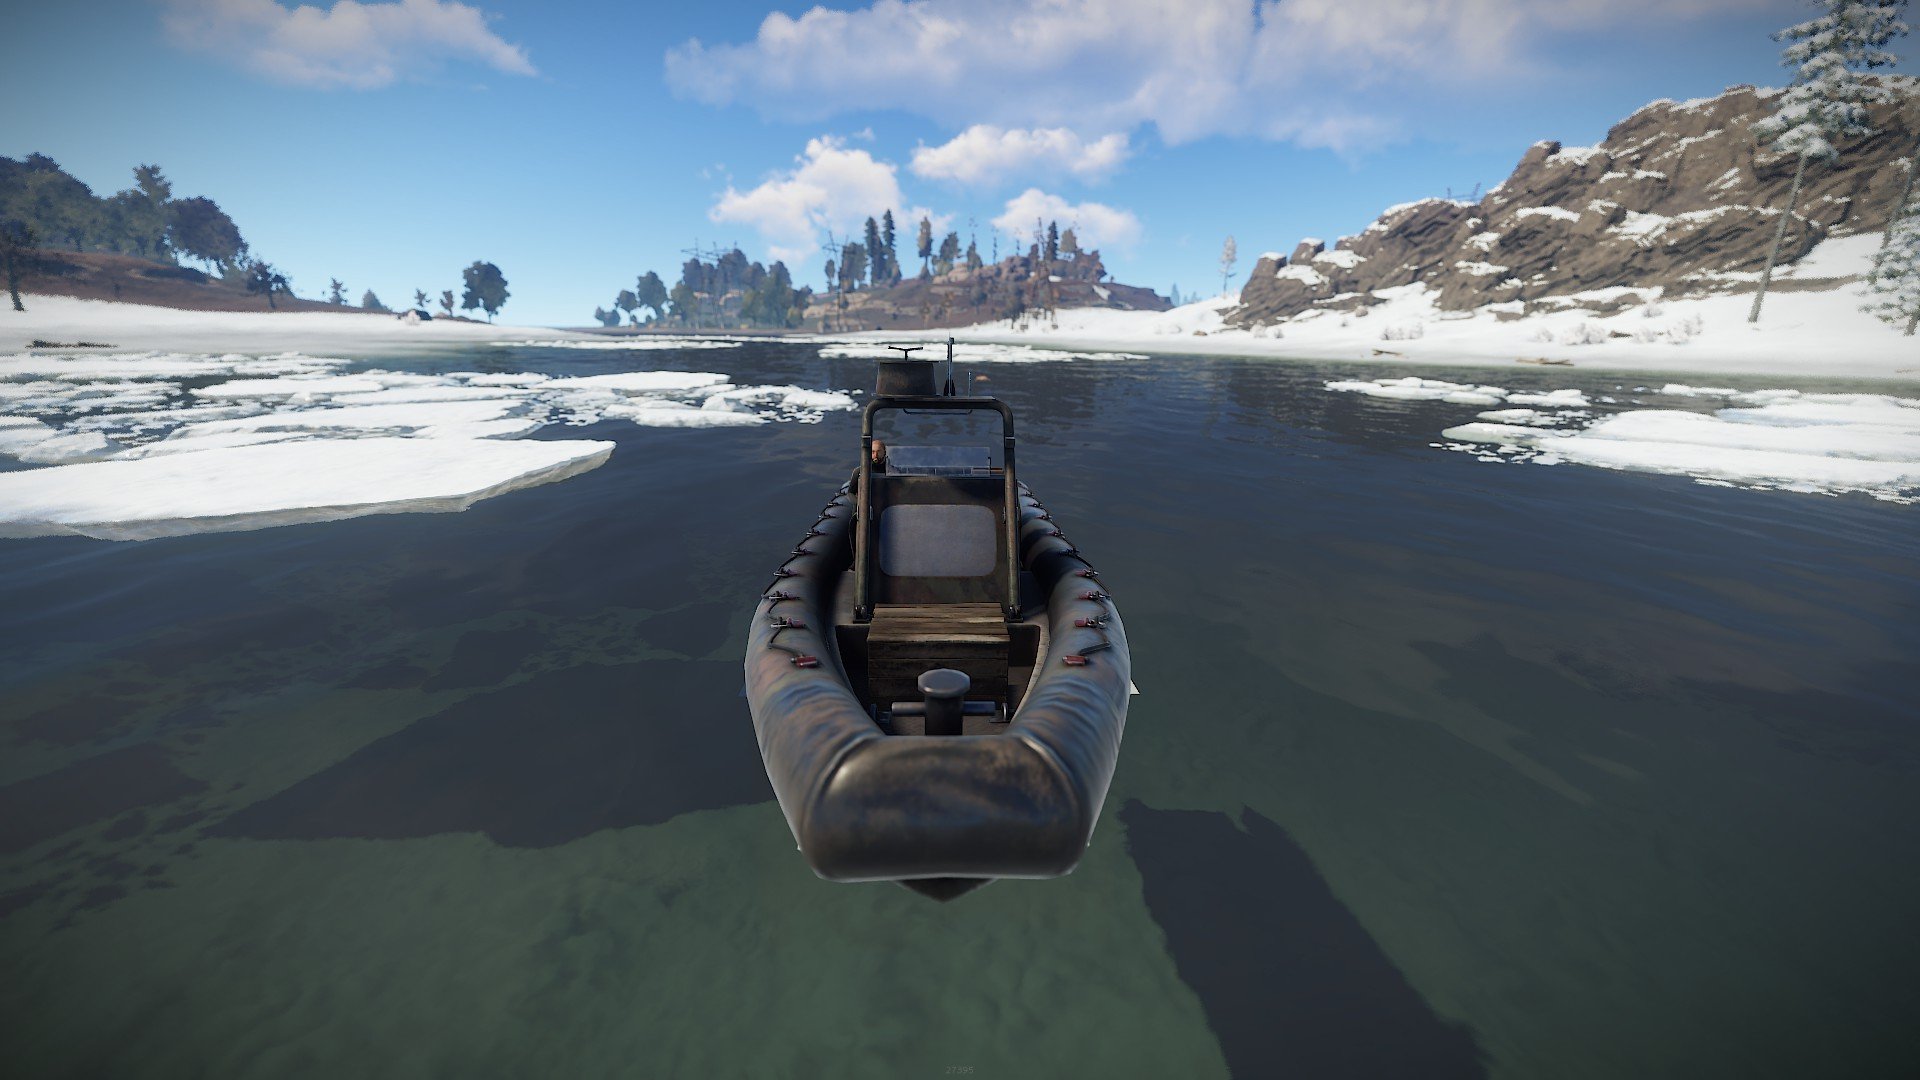 RUST RHIB Command (Ridig-Hulled Inflatable Boat) – Admin ...